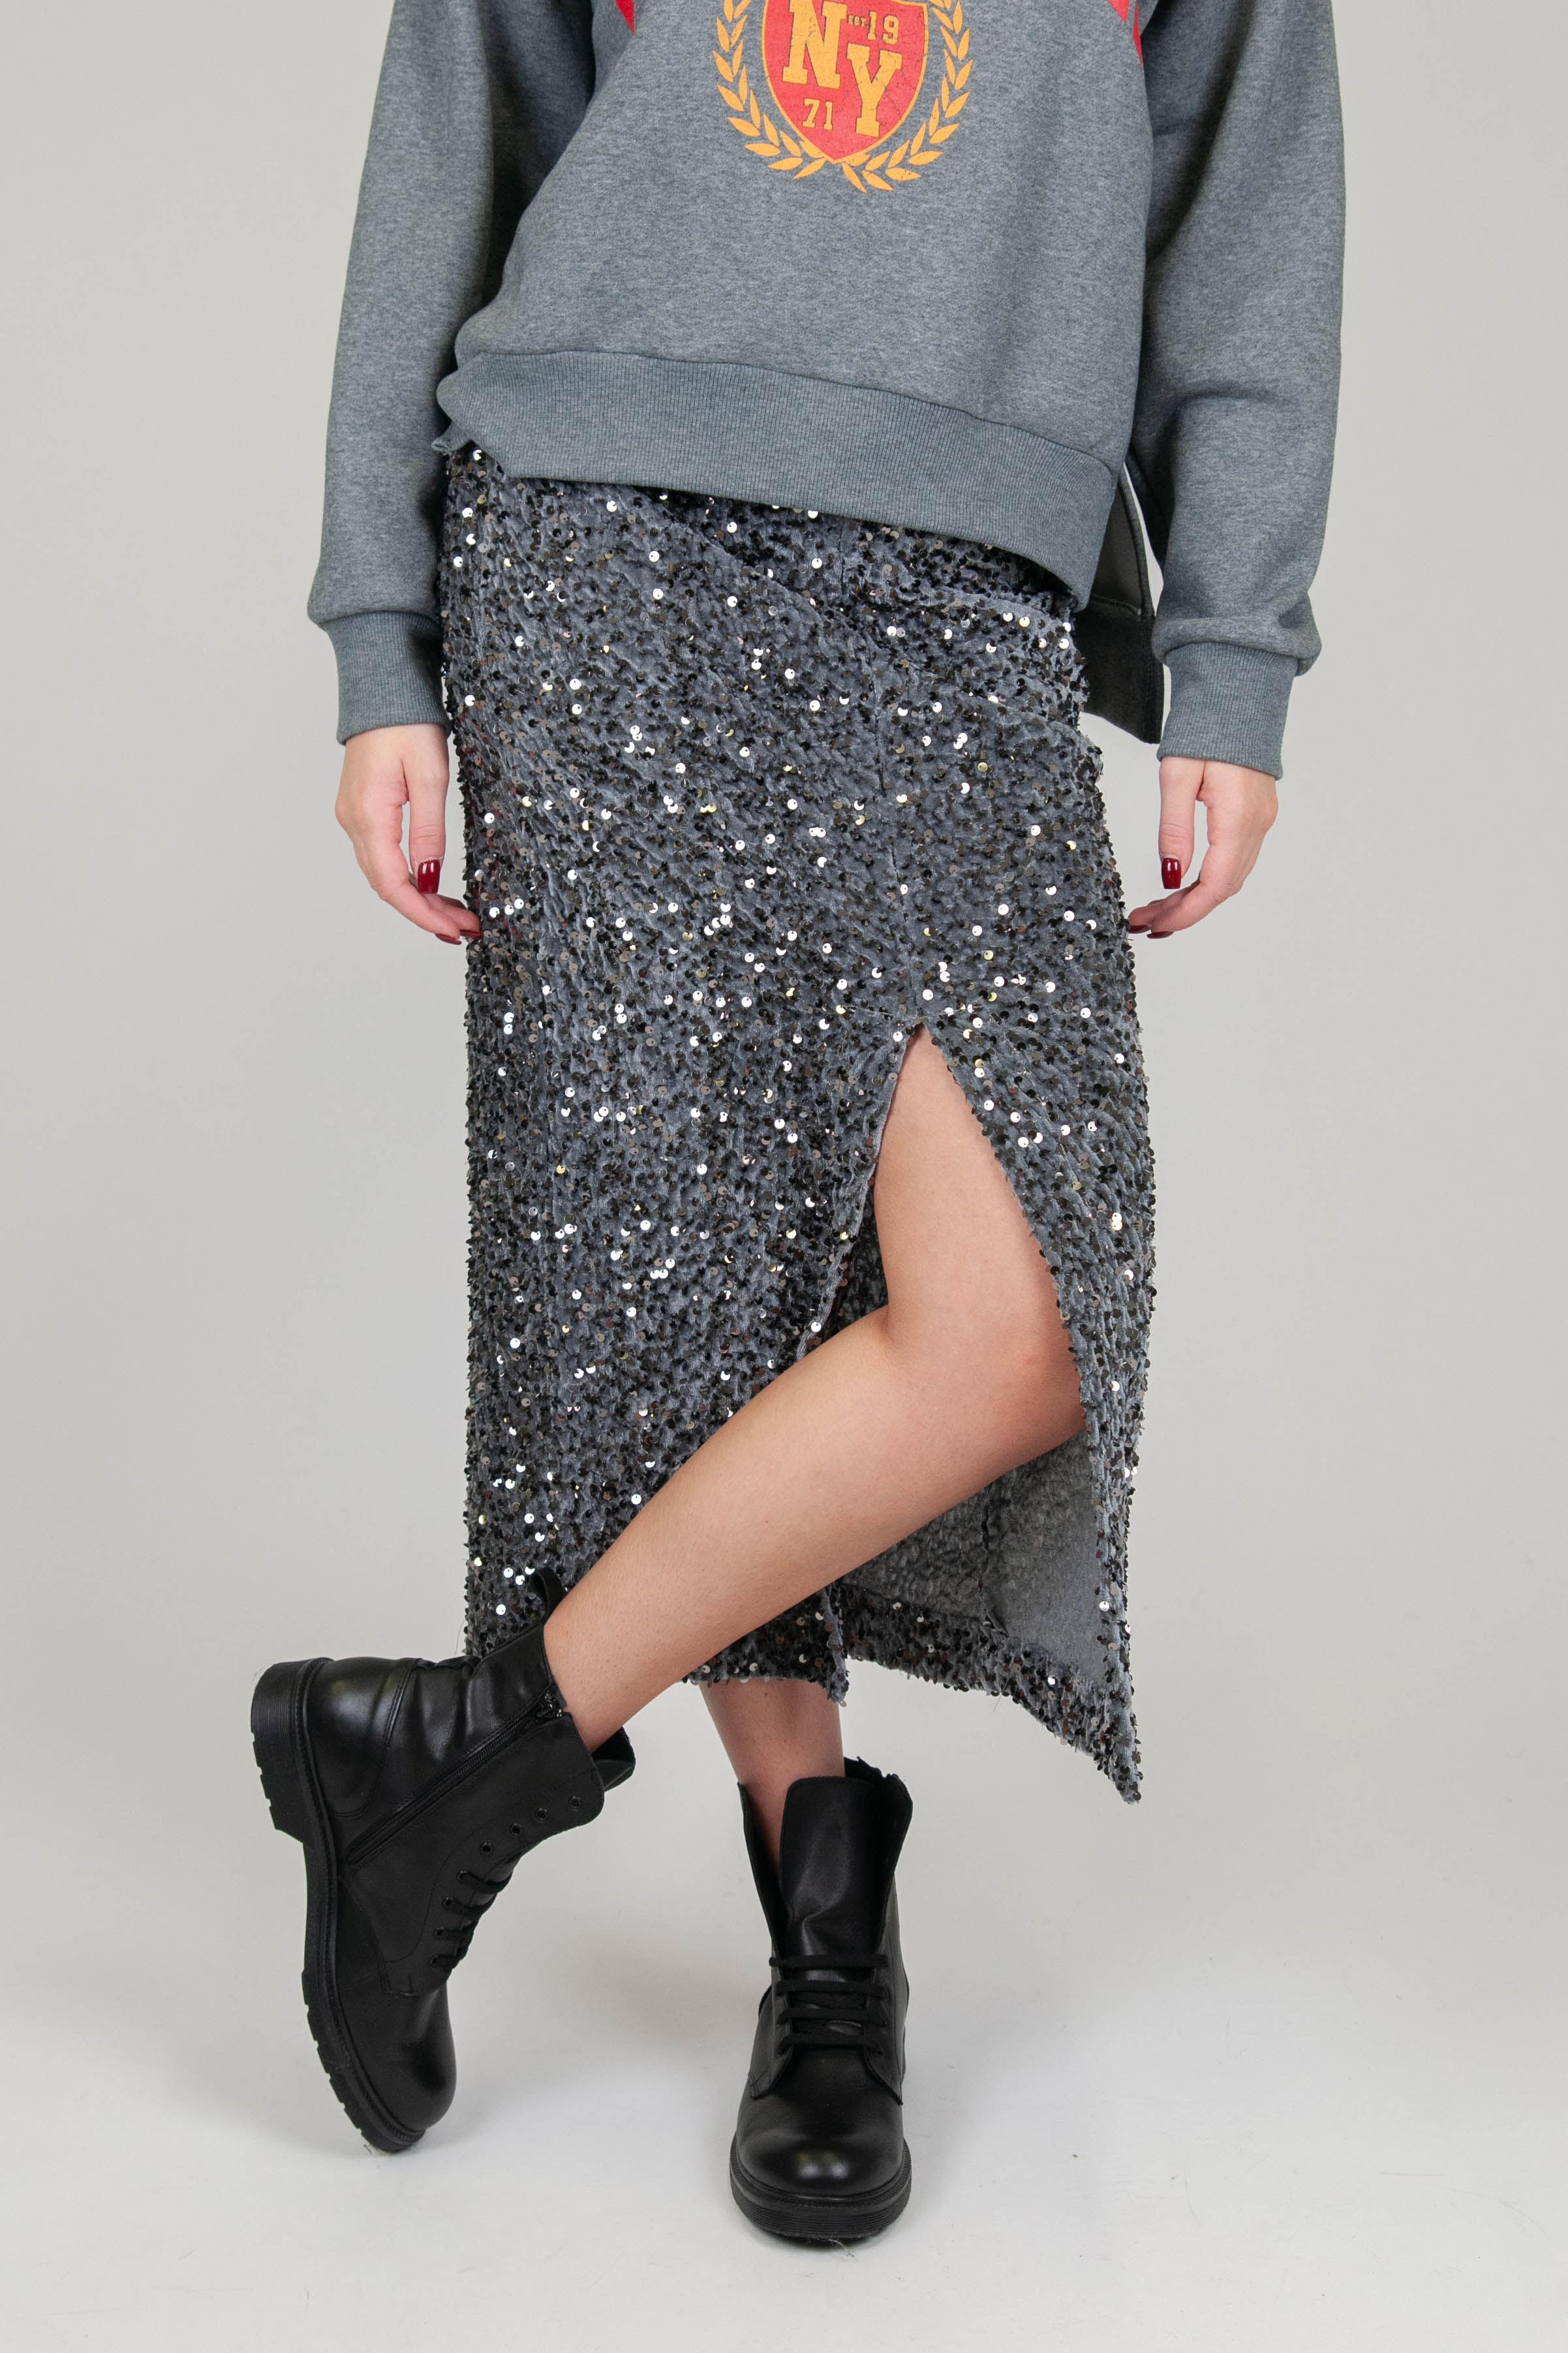 Tension in - Velvet and sequined skirt with central slit